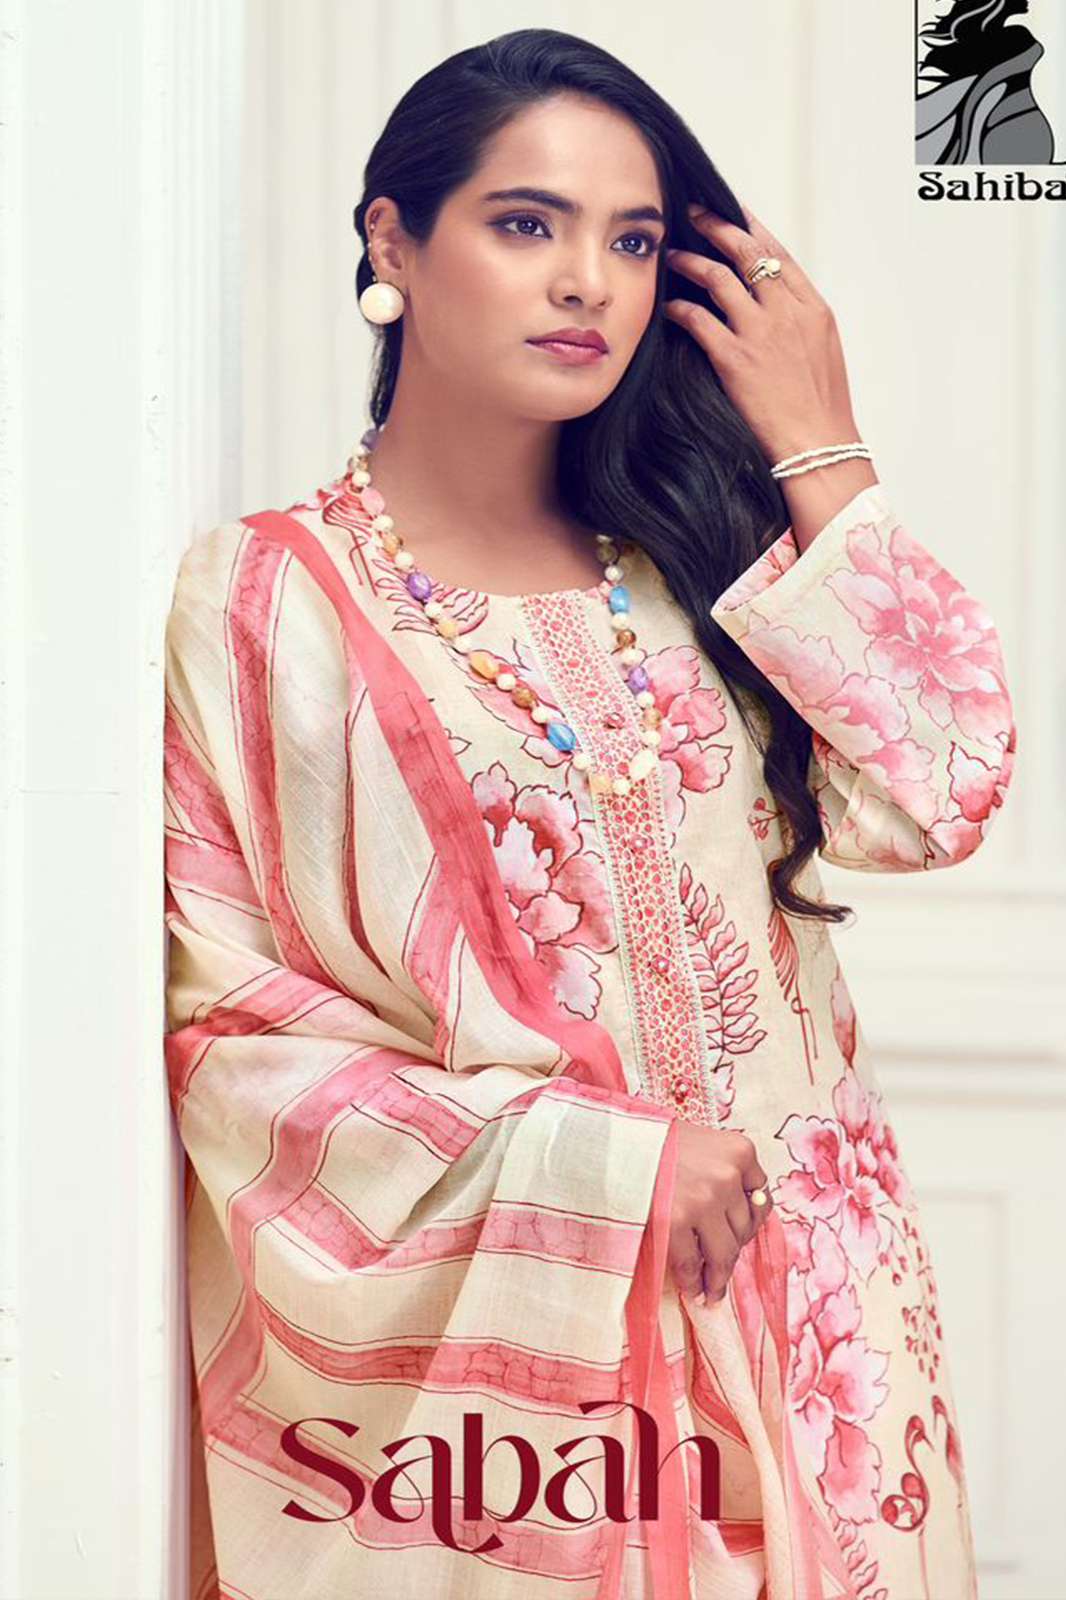 Sahiba Sabah COTTON LAWN DIGITAL PRINT WITH NECK PATTI EMBROIDERY AND ORGENZA DAMAN PATTA EMBROIDERY SUIT